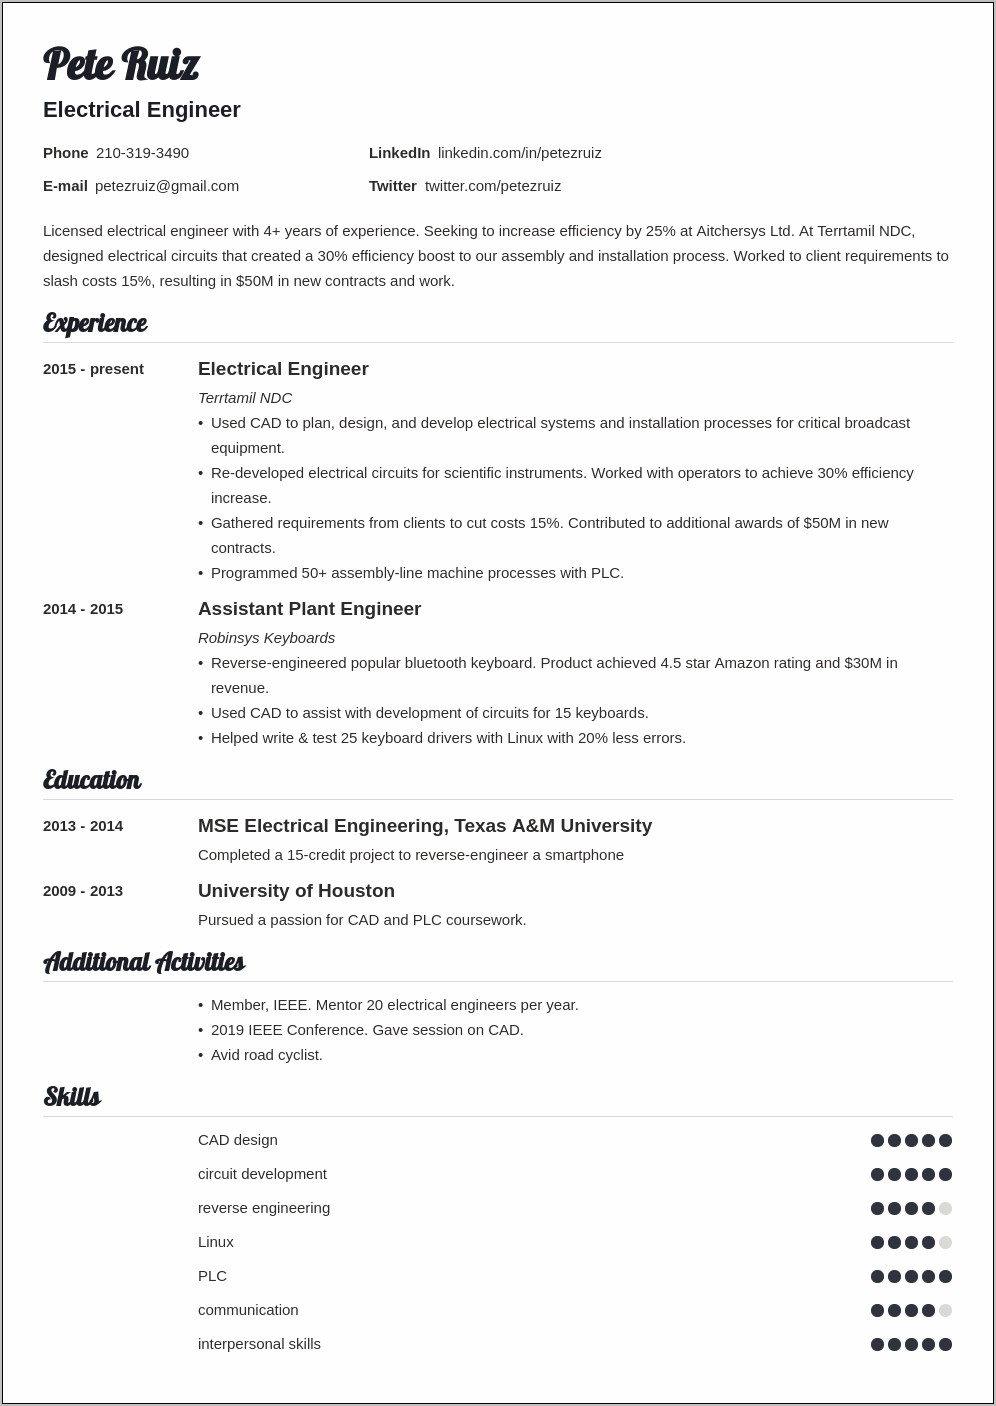 Sample Resume For Electrical Engineering Student